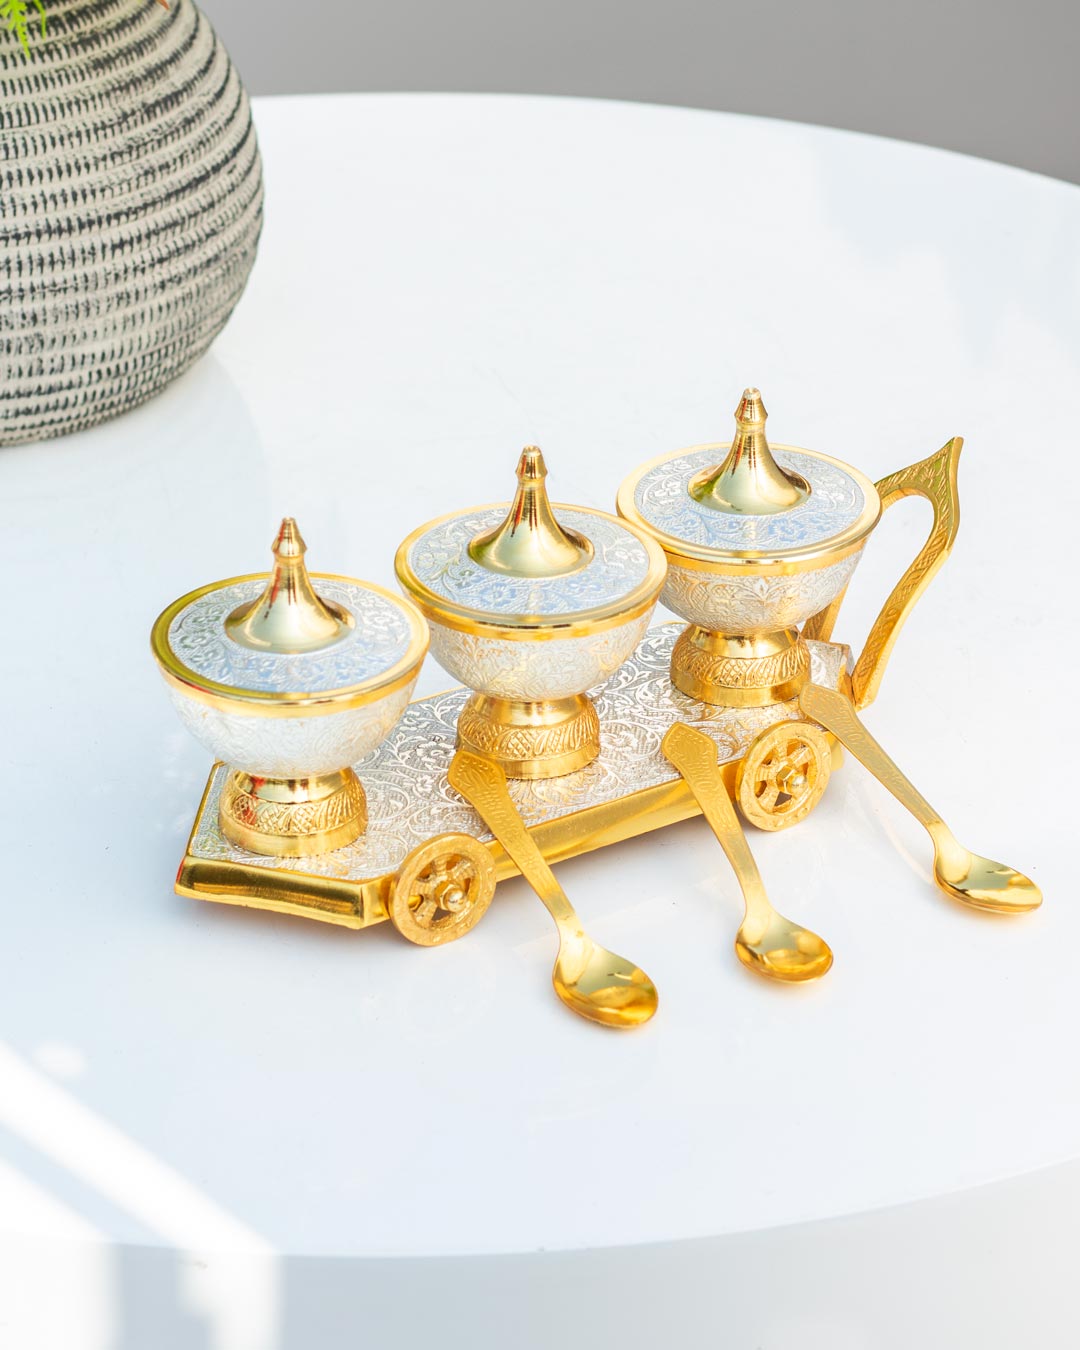 Gold Plated Antique Serving Bowl Trolley